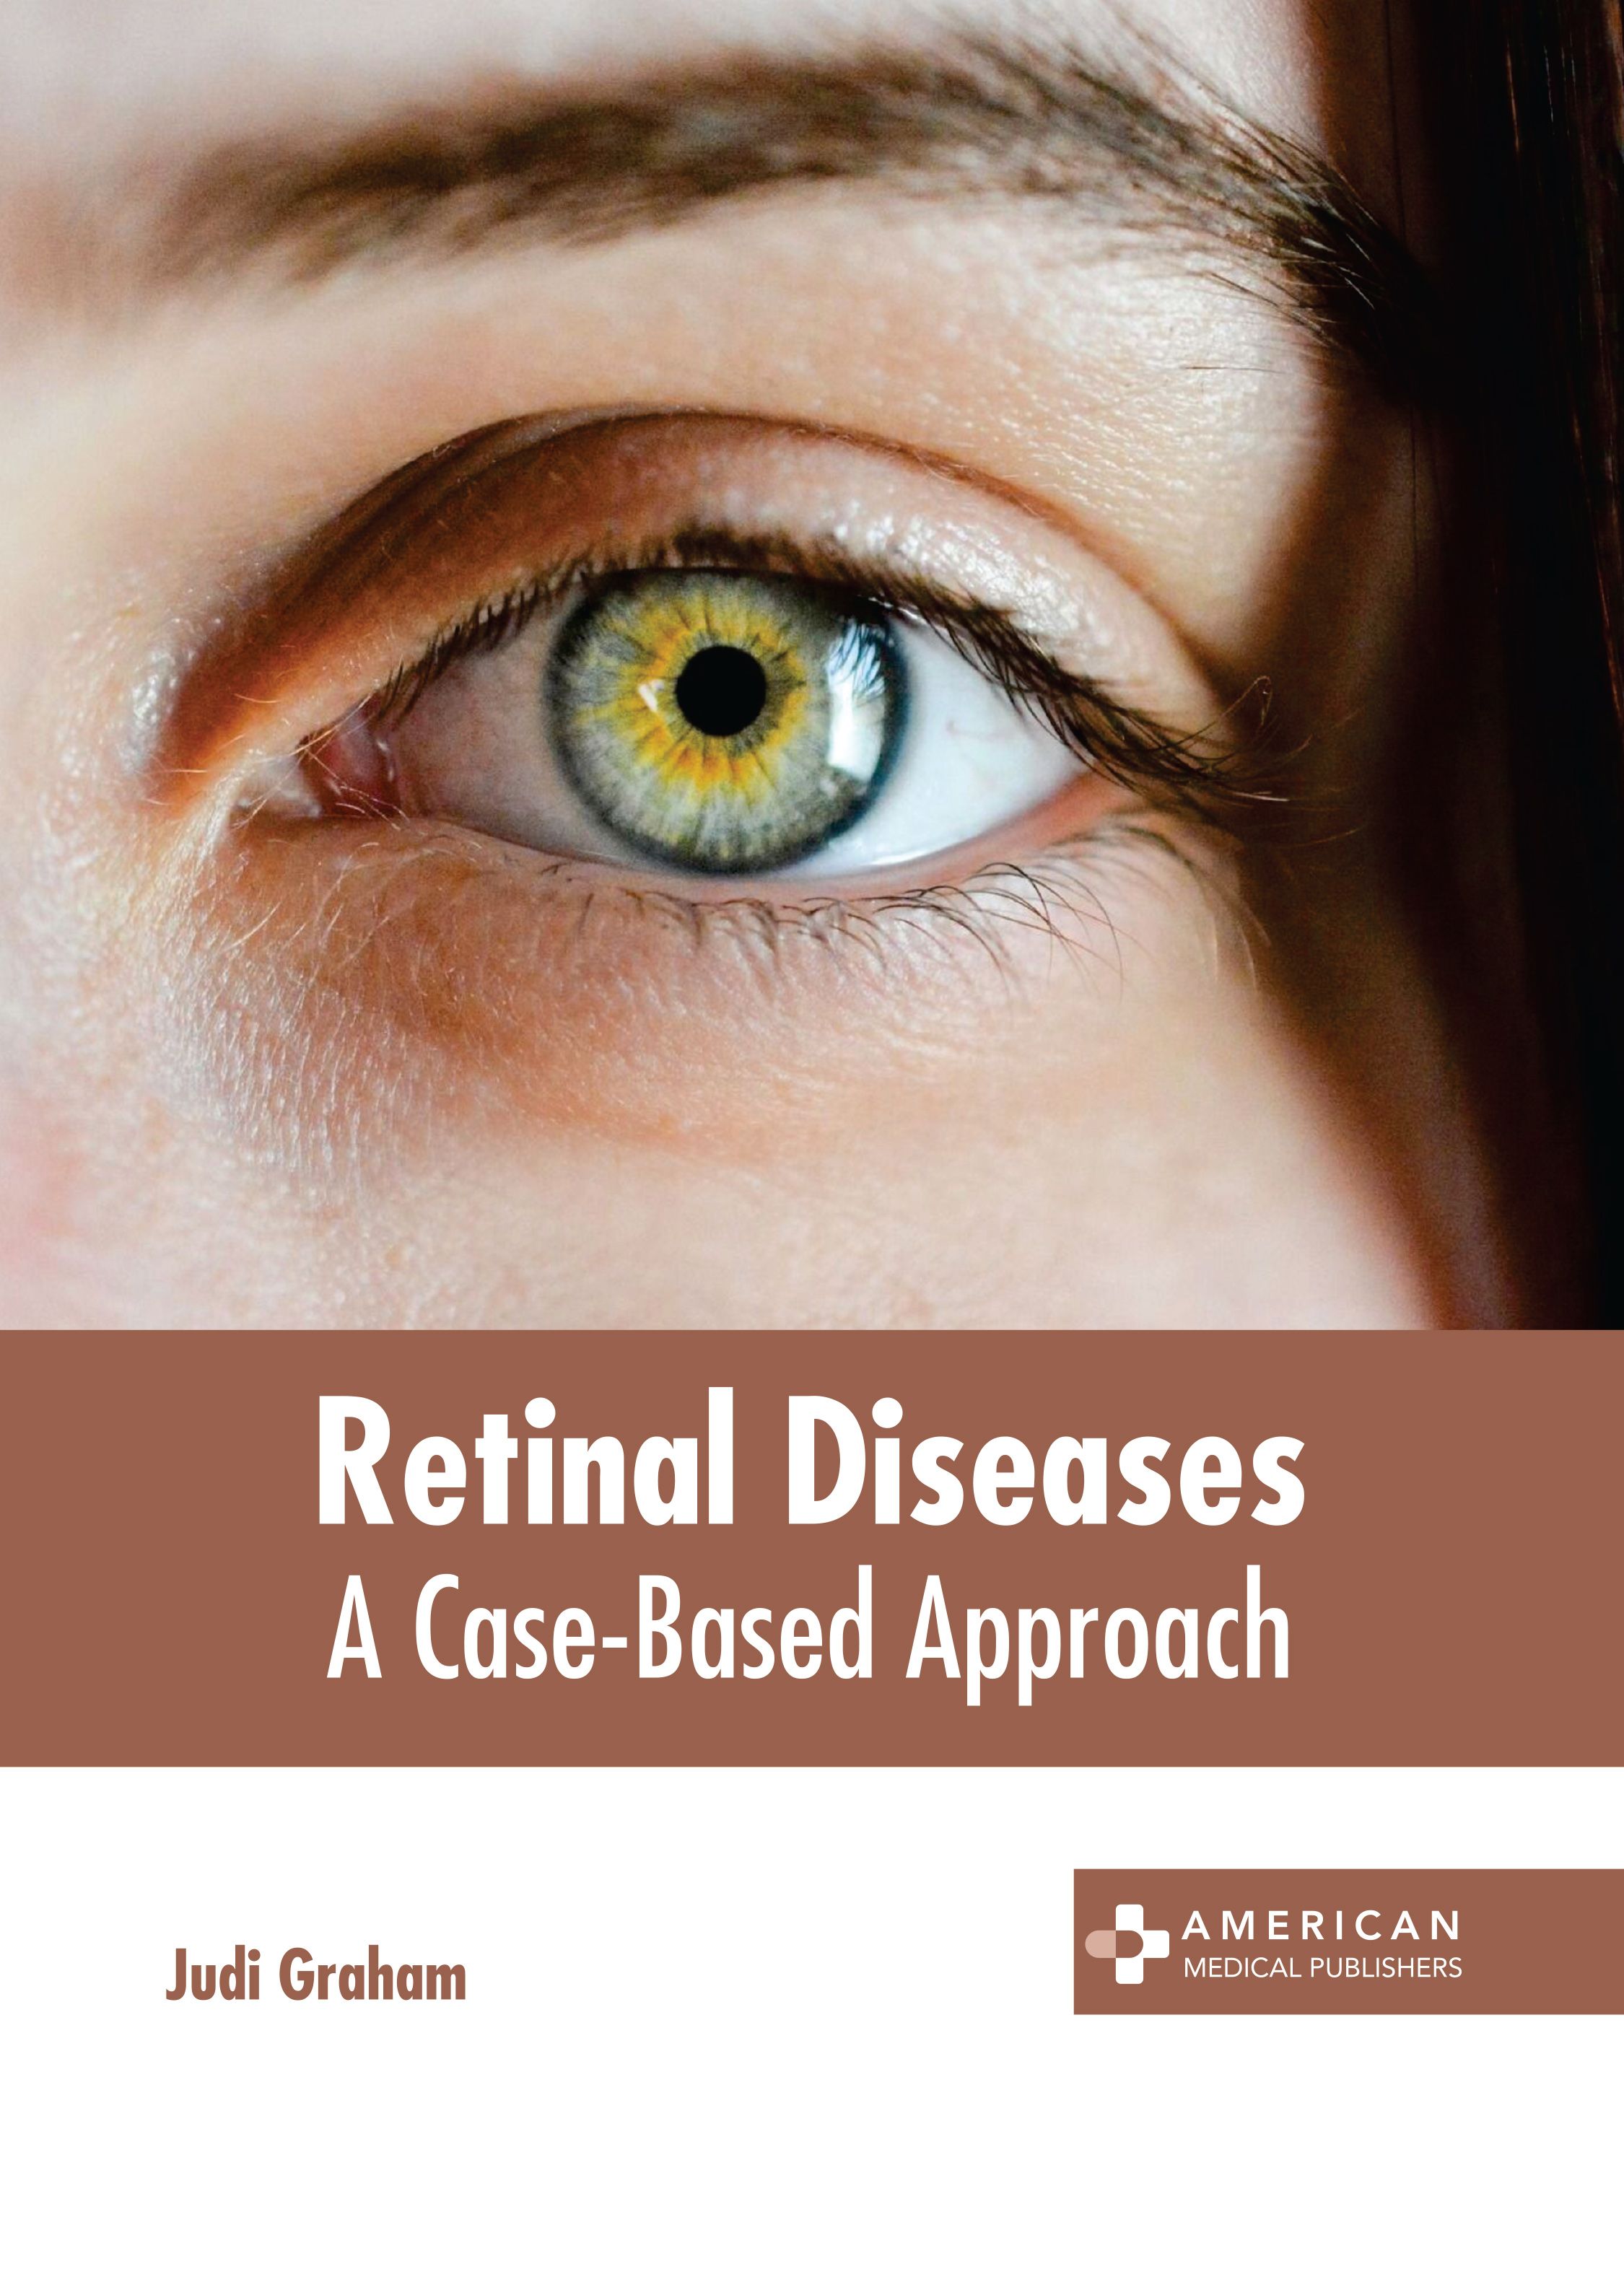 RETINAL DISEASES: A CASE-BASED APPROACH